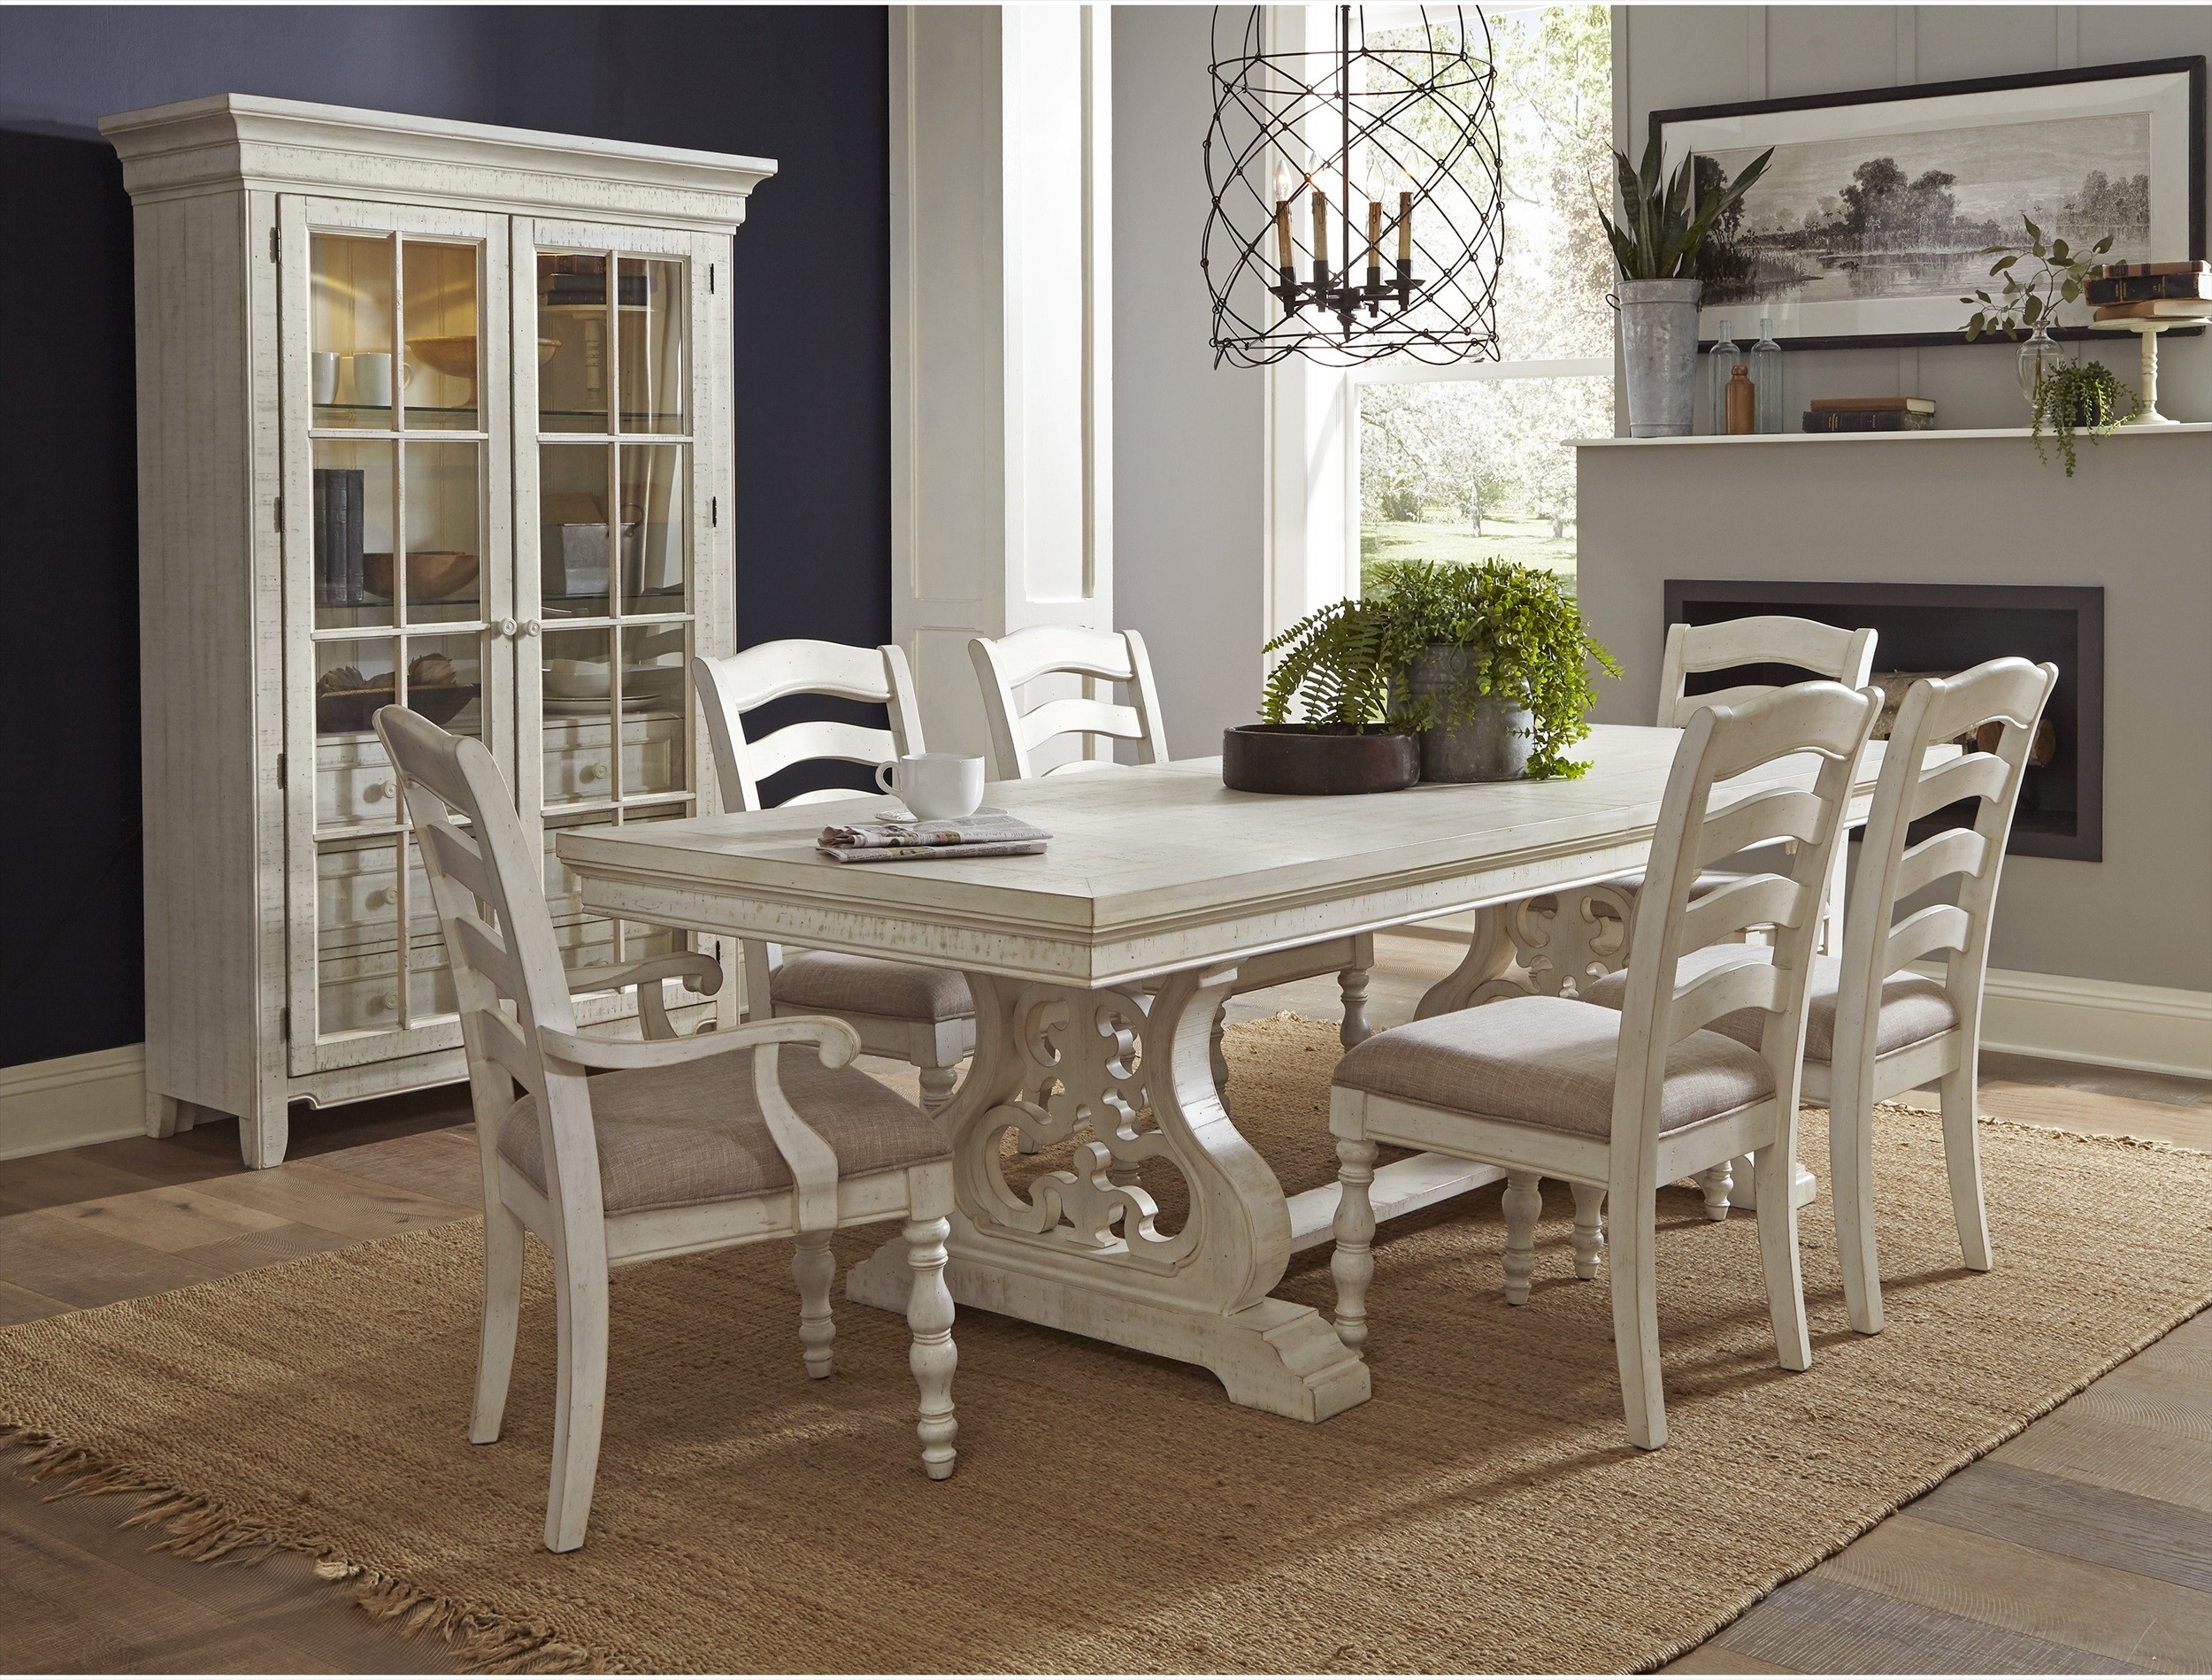 Rustic Weathered White Dining Room, White Rustic Dining Room Chairs